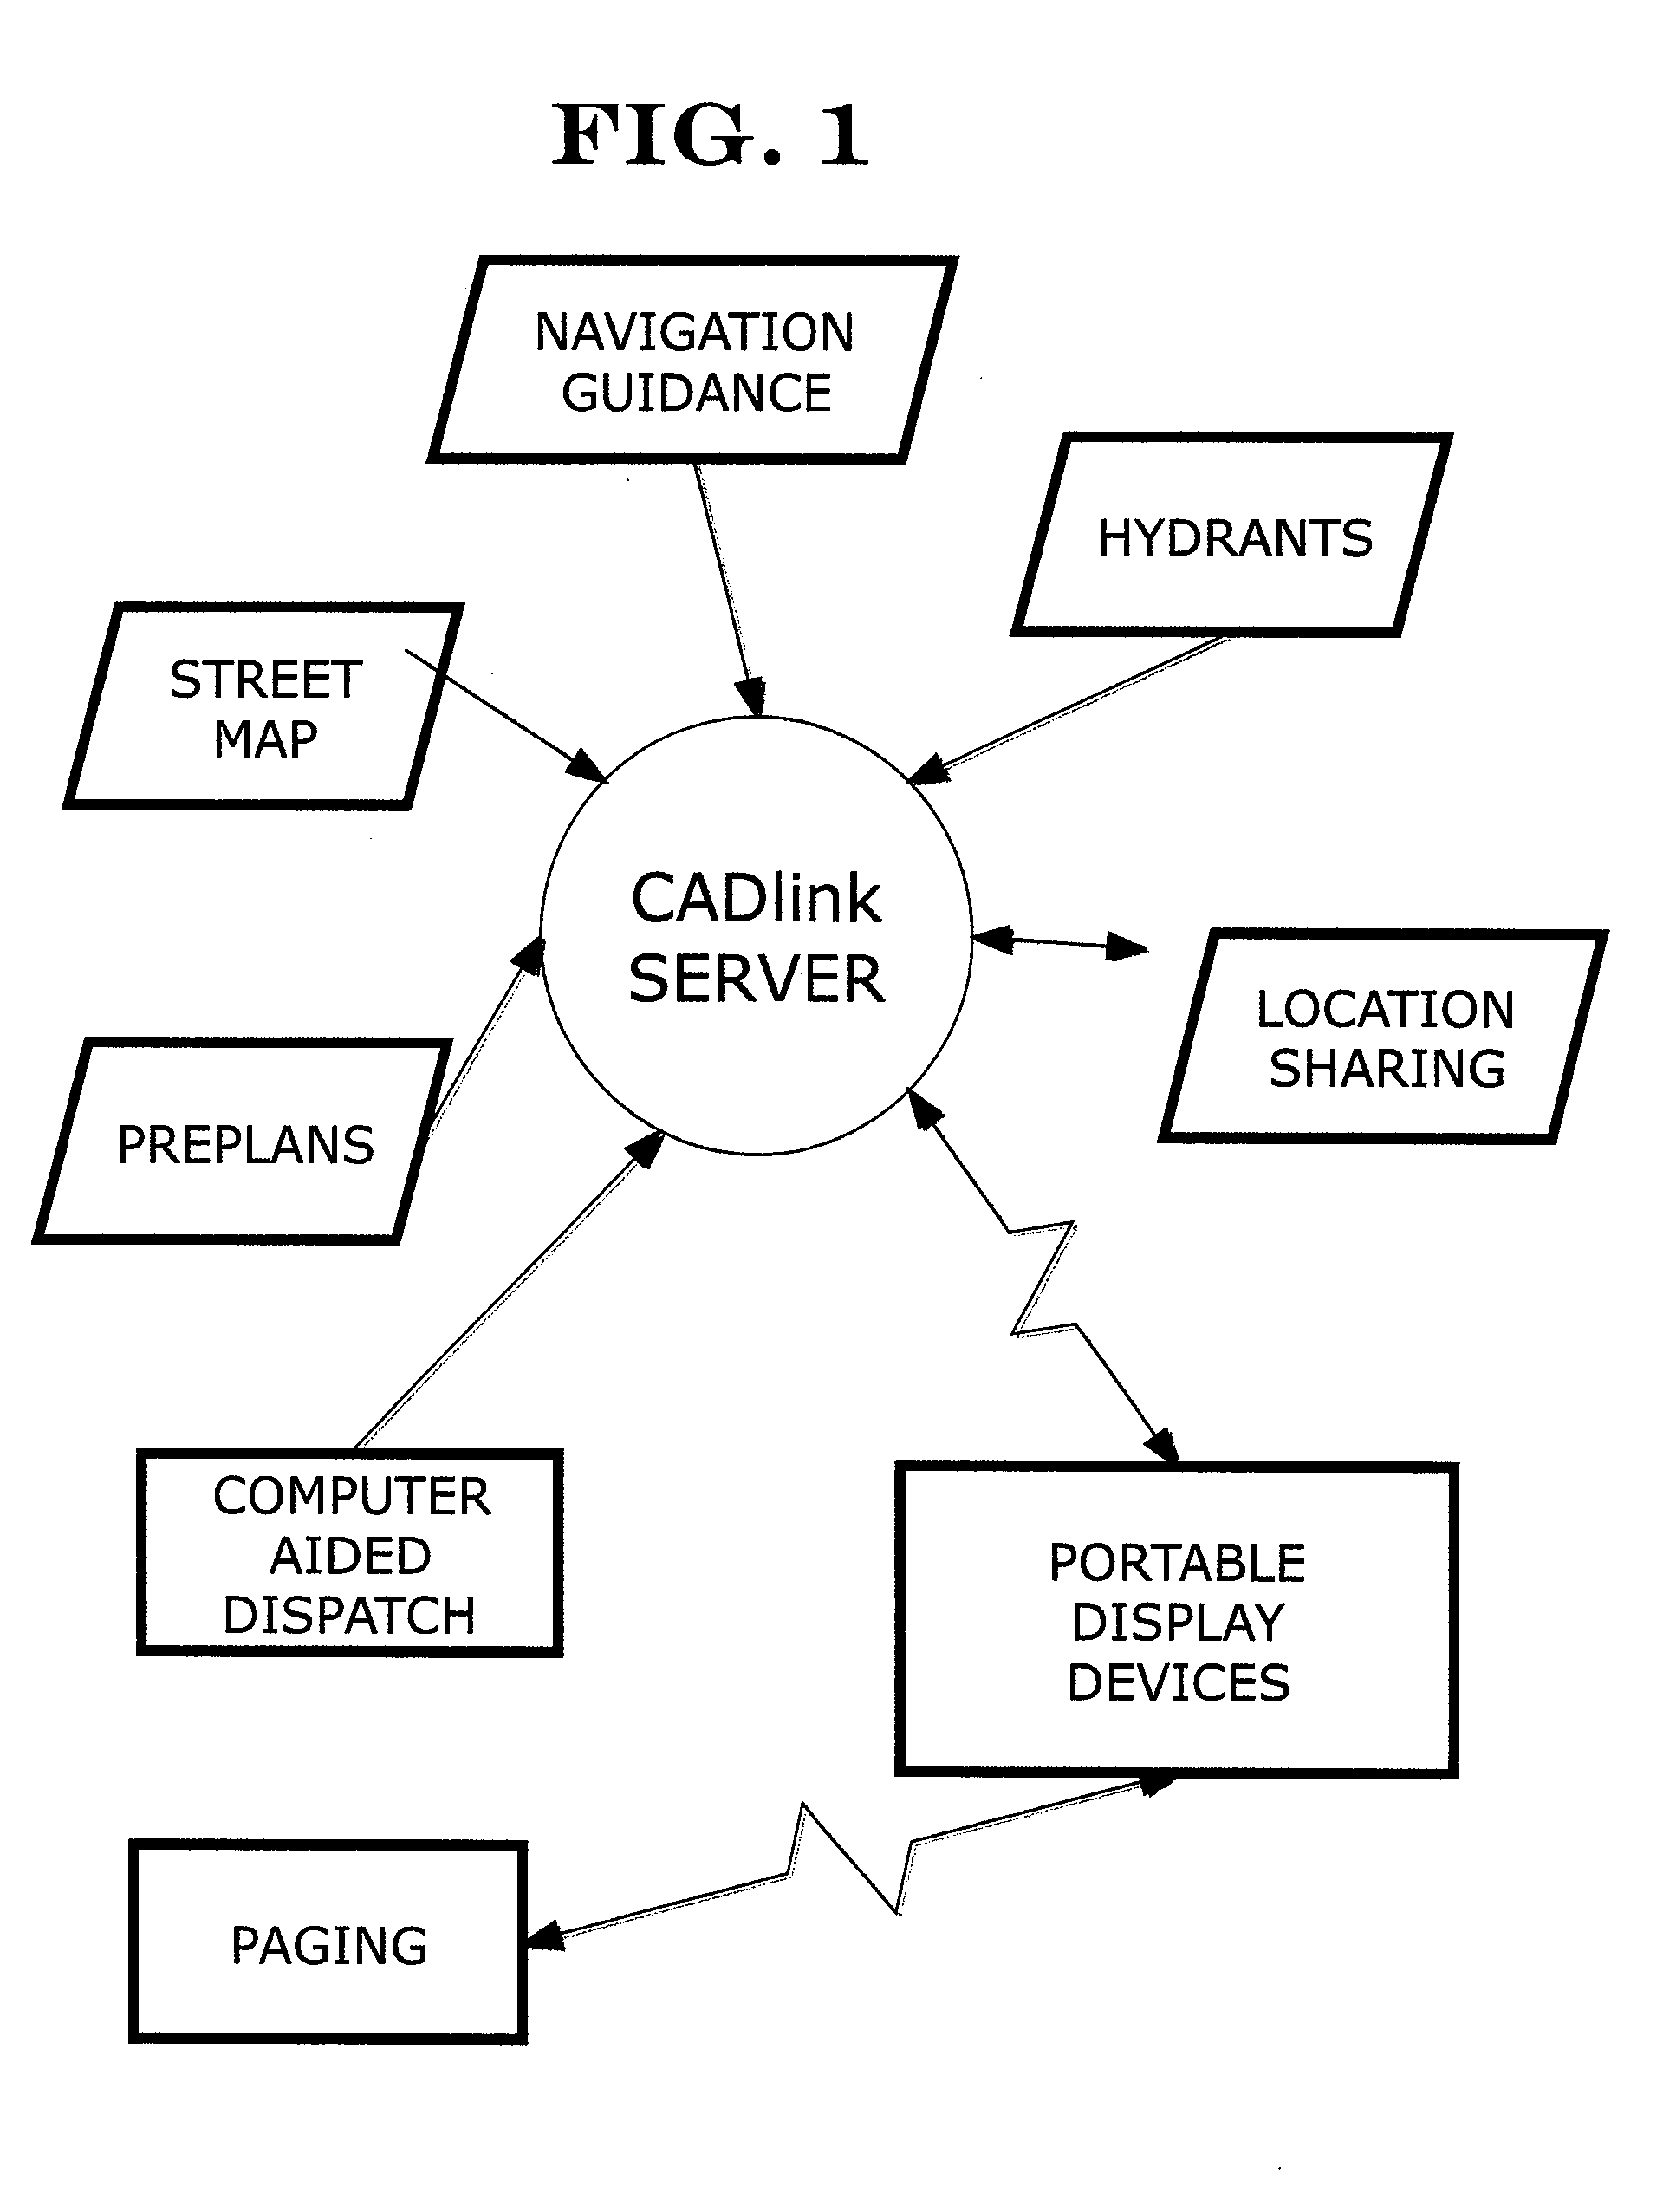 System and method for emergency response